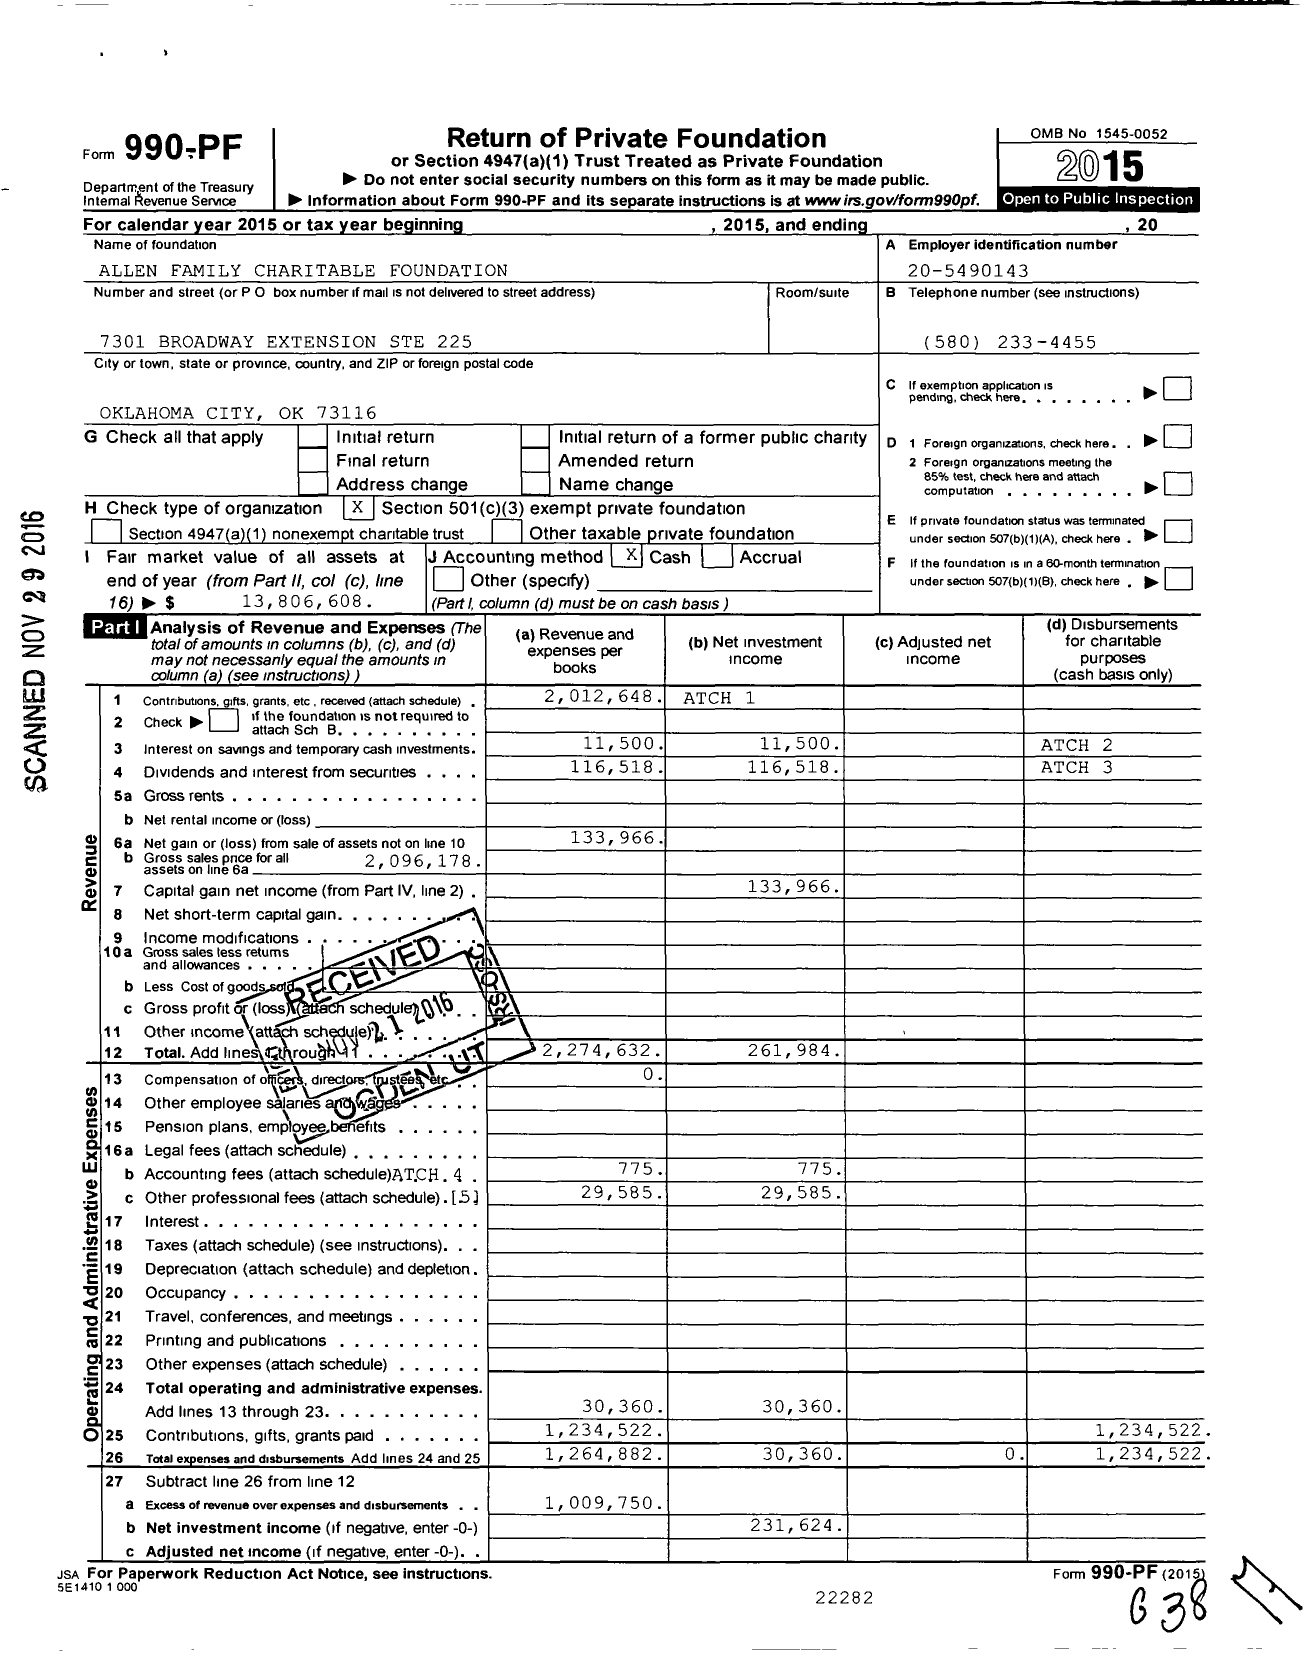 Image of first page of 2015 Form 990PF for Allen Family Charitable Foundation